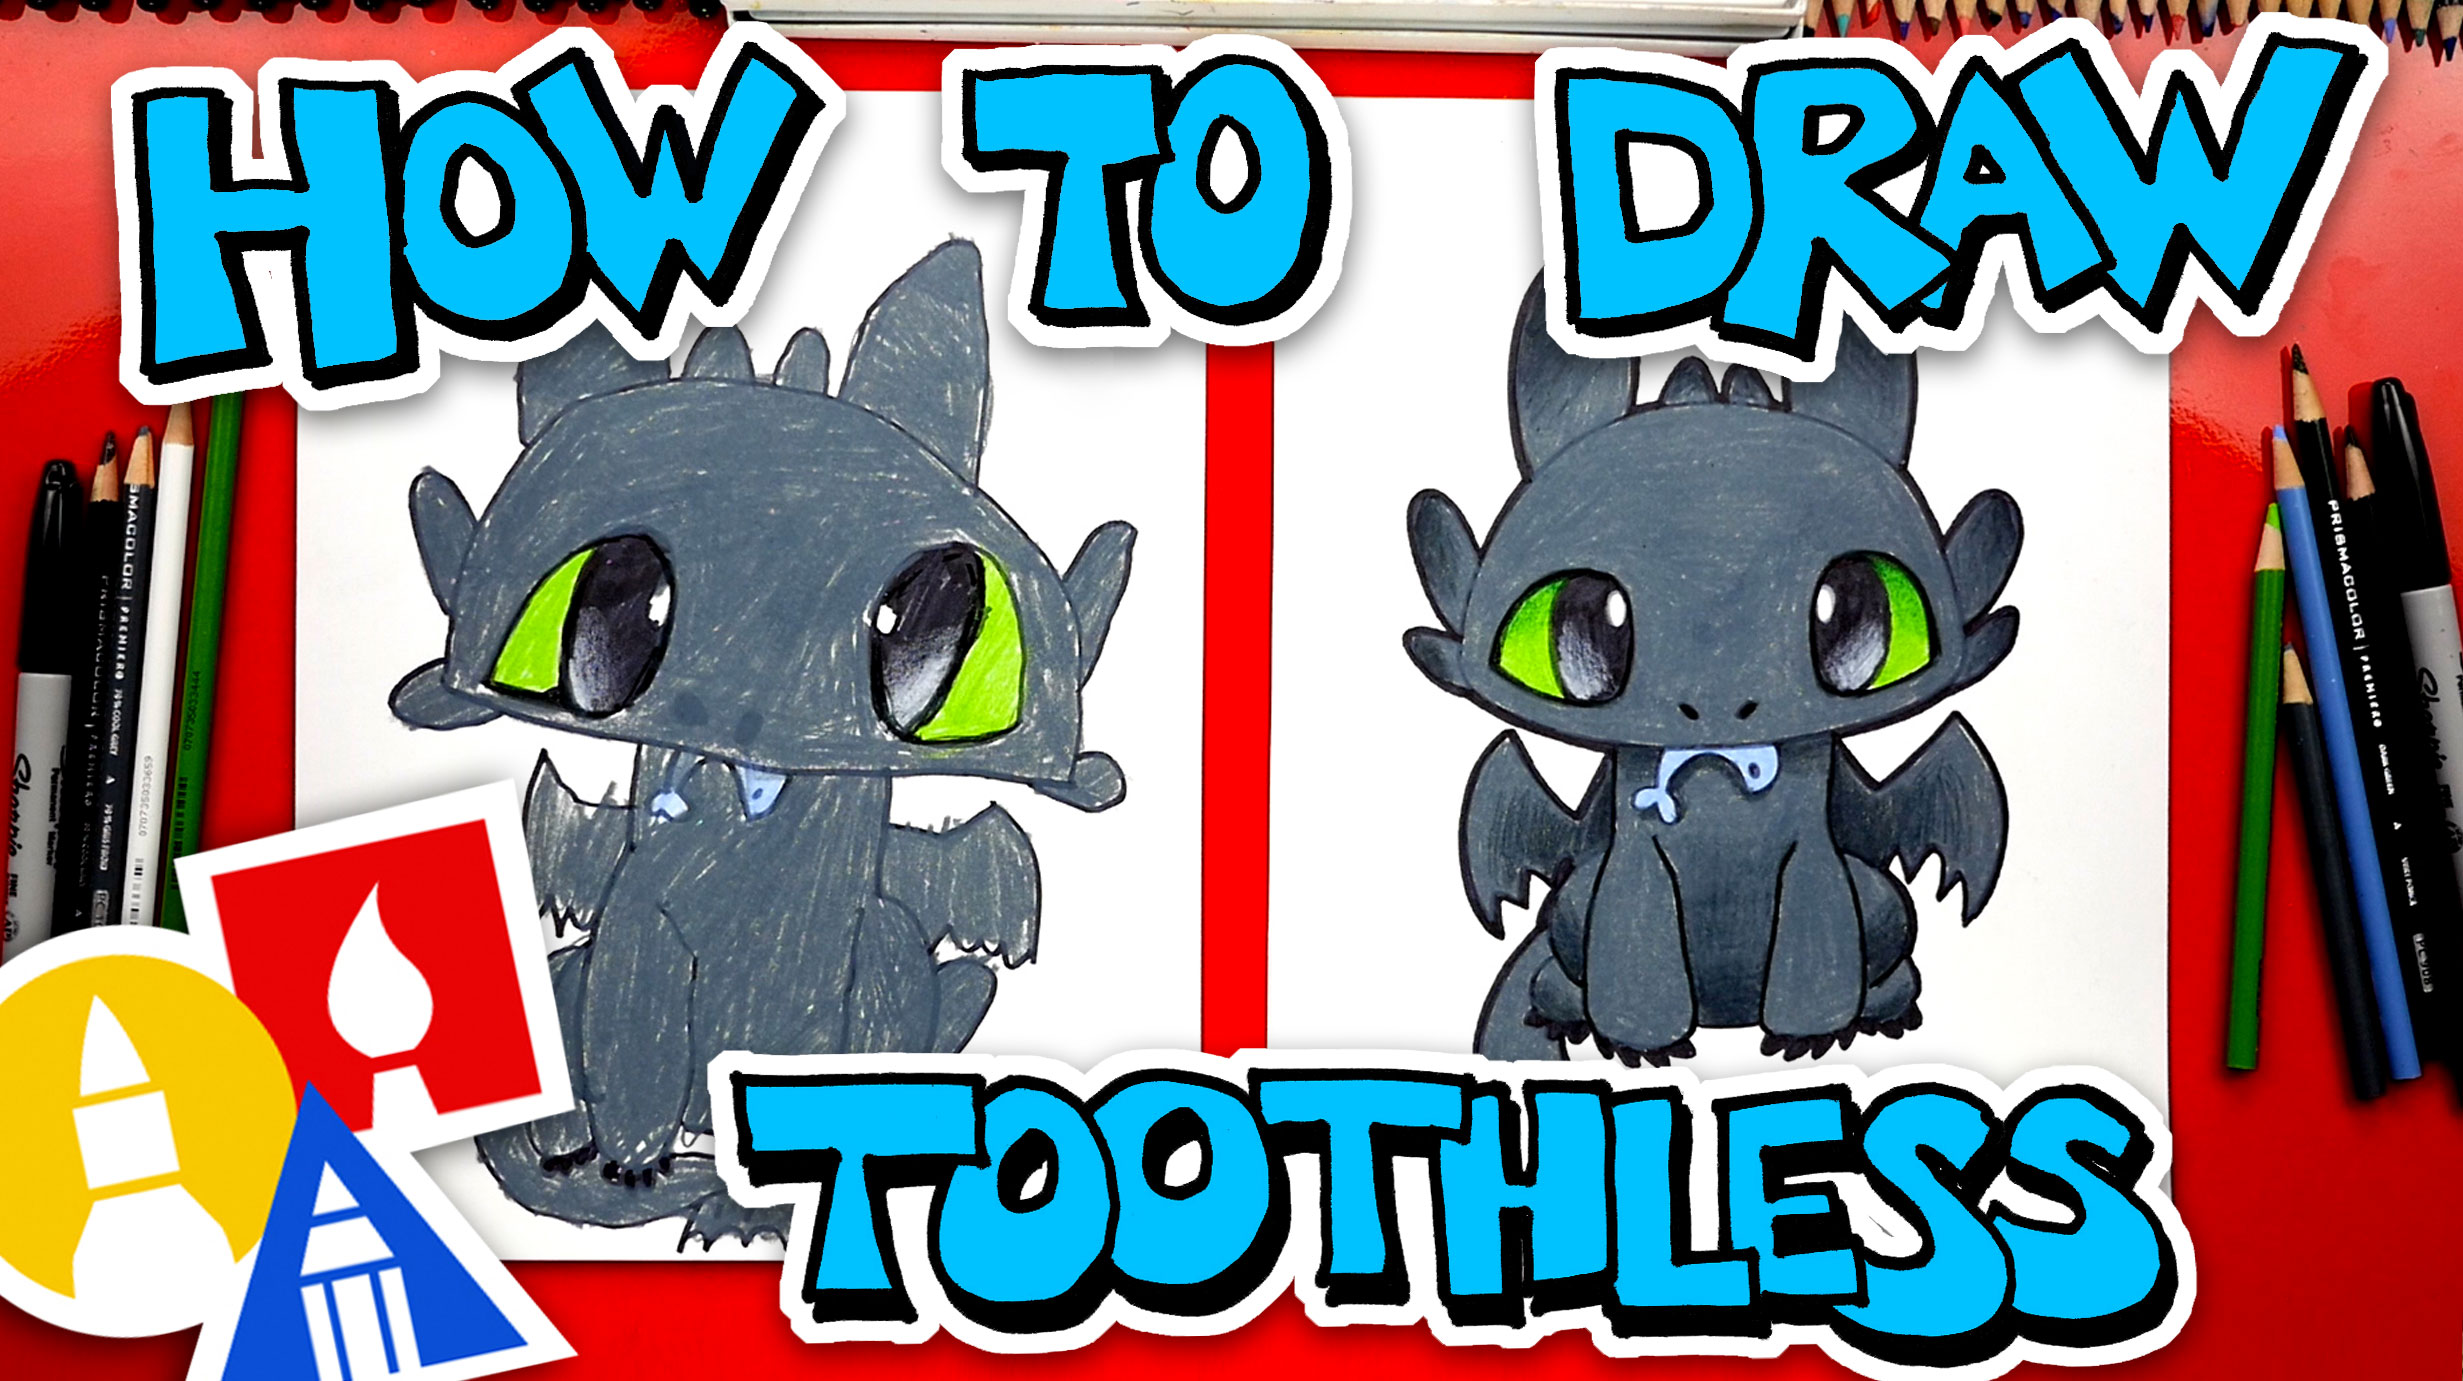 How To Draw Toothless From How To Train Your Dragon (Night Fury) Art